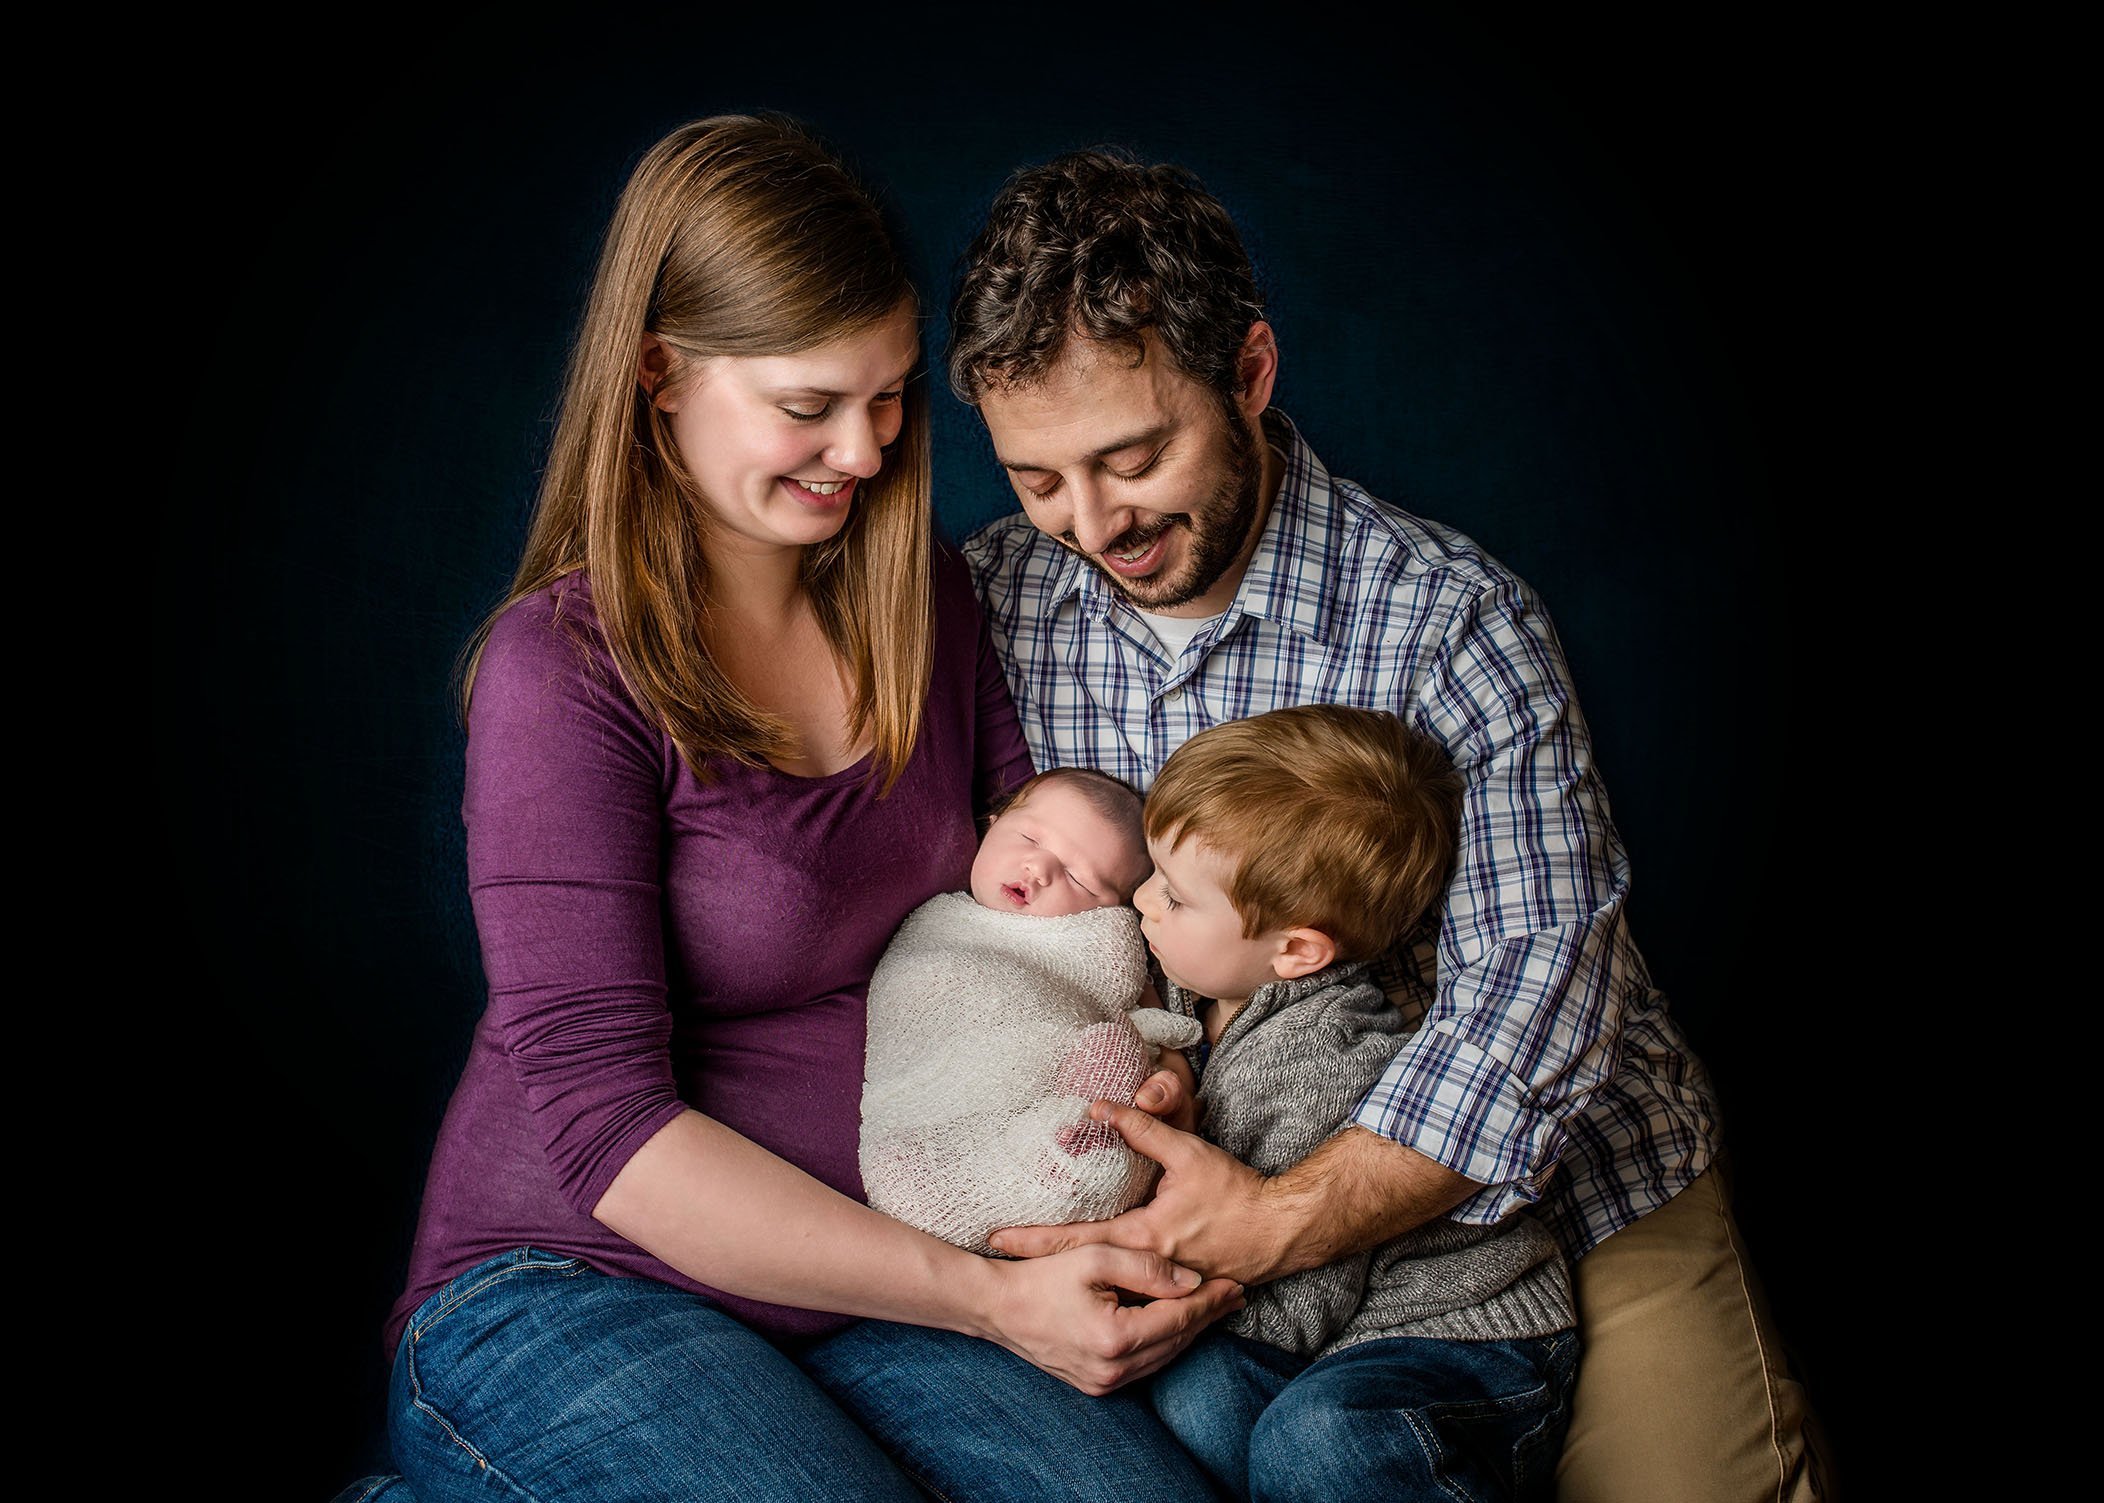 newborn baby girl with her parents and big brother smiling down on her One Big Happy Photo